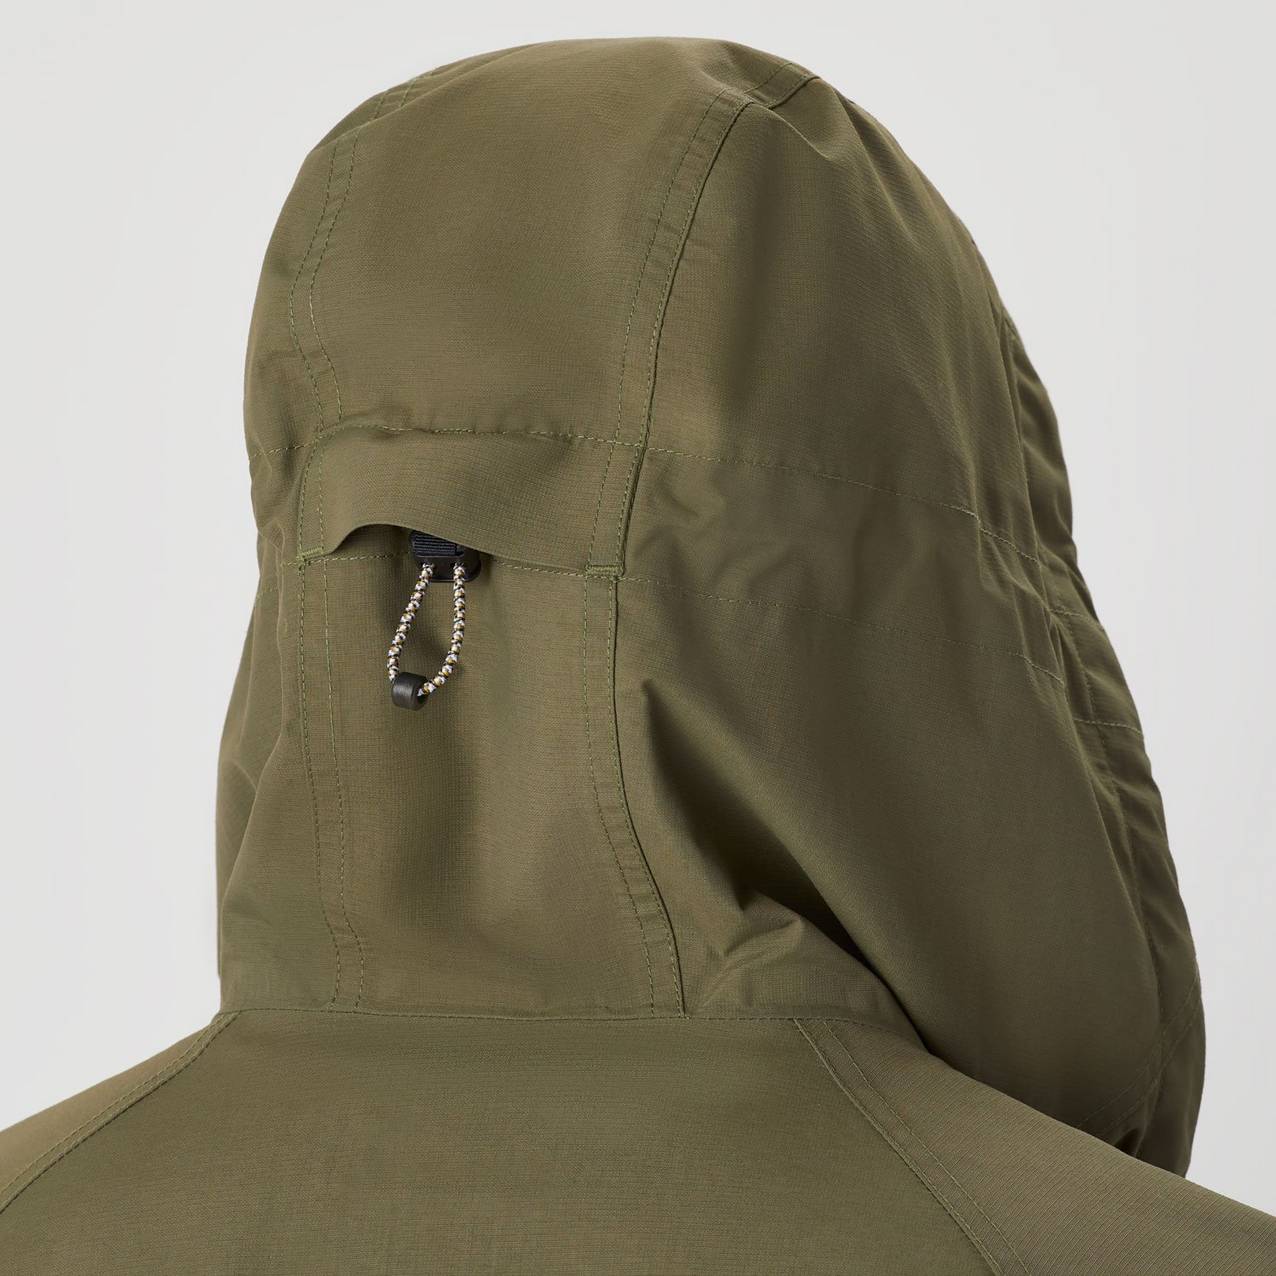 View of back of hood with adjustable elastic